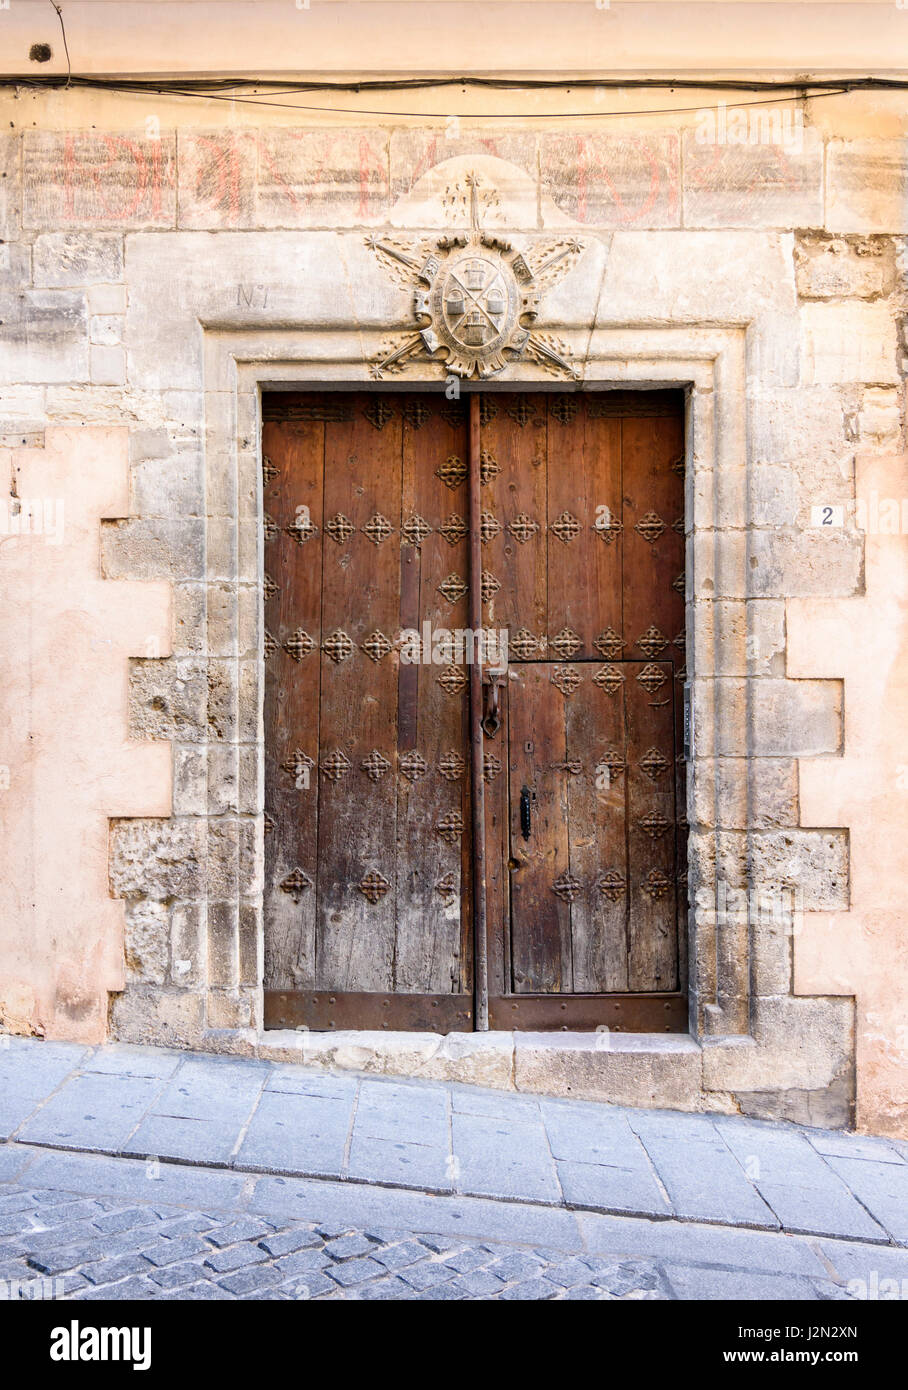 Old wooden double doors below a coat of arms on a historic building in the old medieval town of Cuenca, Castilla La Mancha, Spain Stock Photo